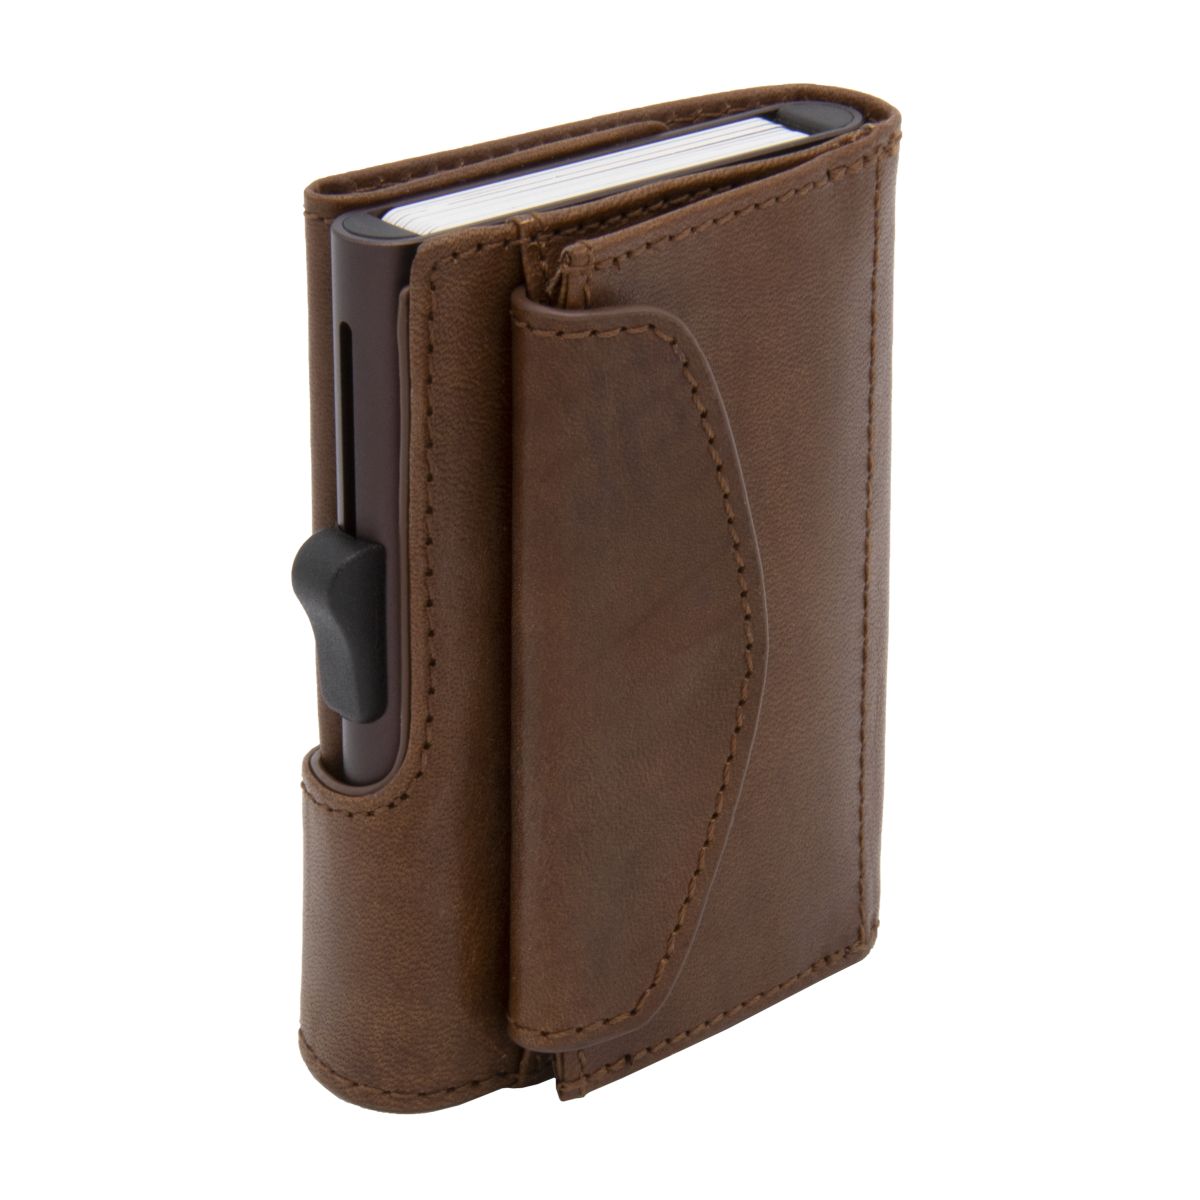 C-Secure XL Aluminum Wallet with Vegetable Genuine Leather and Coins Pocket - Brown